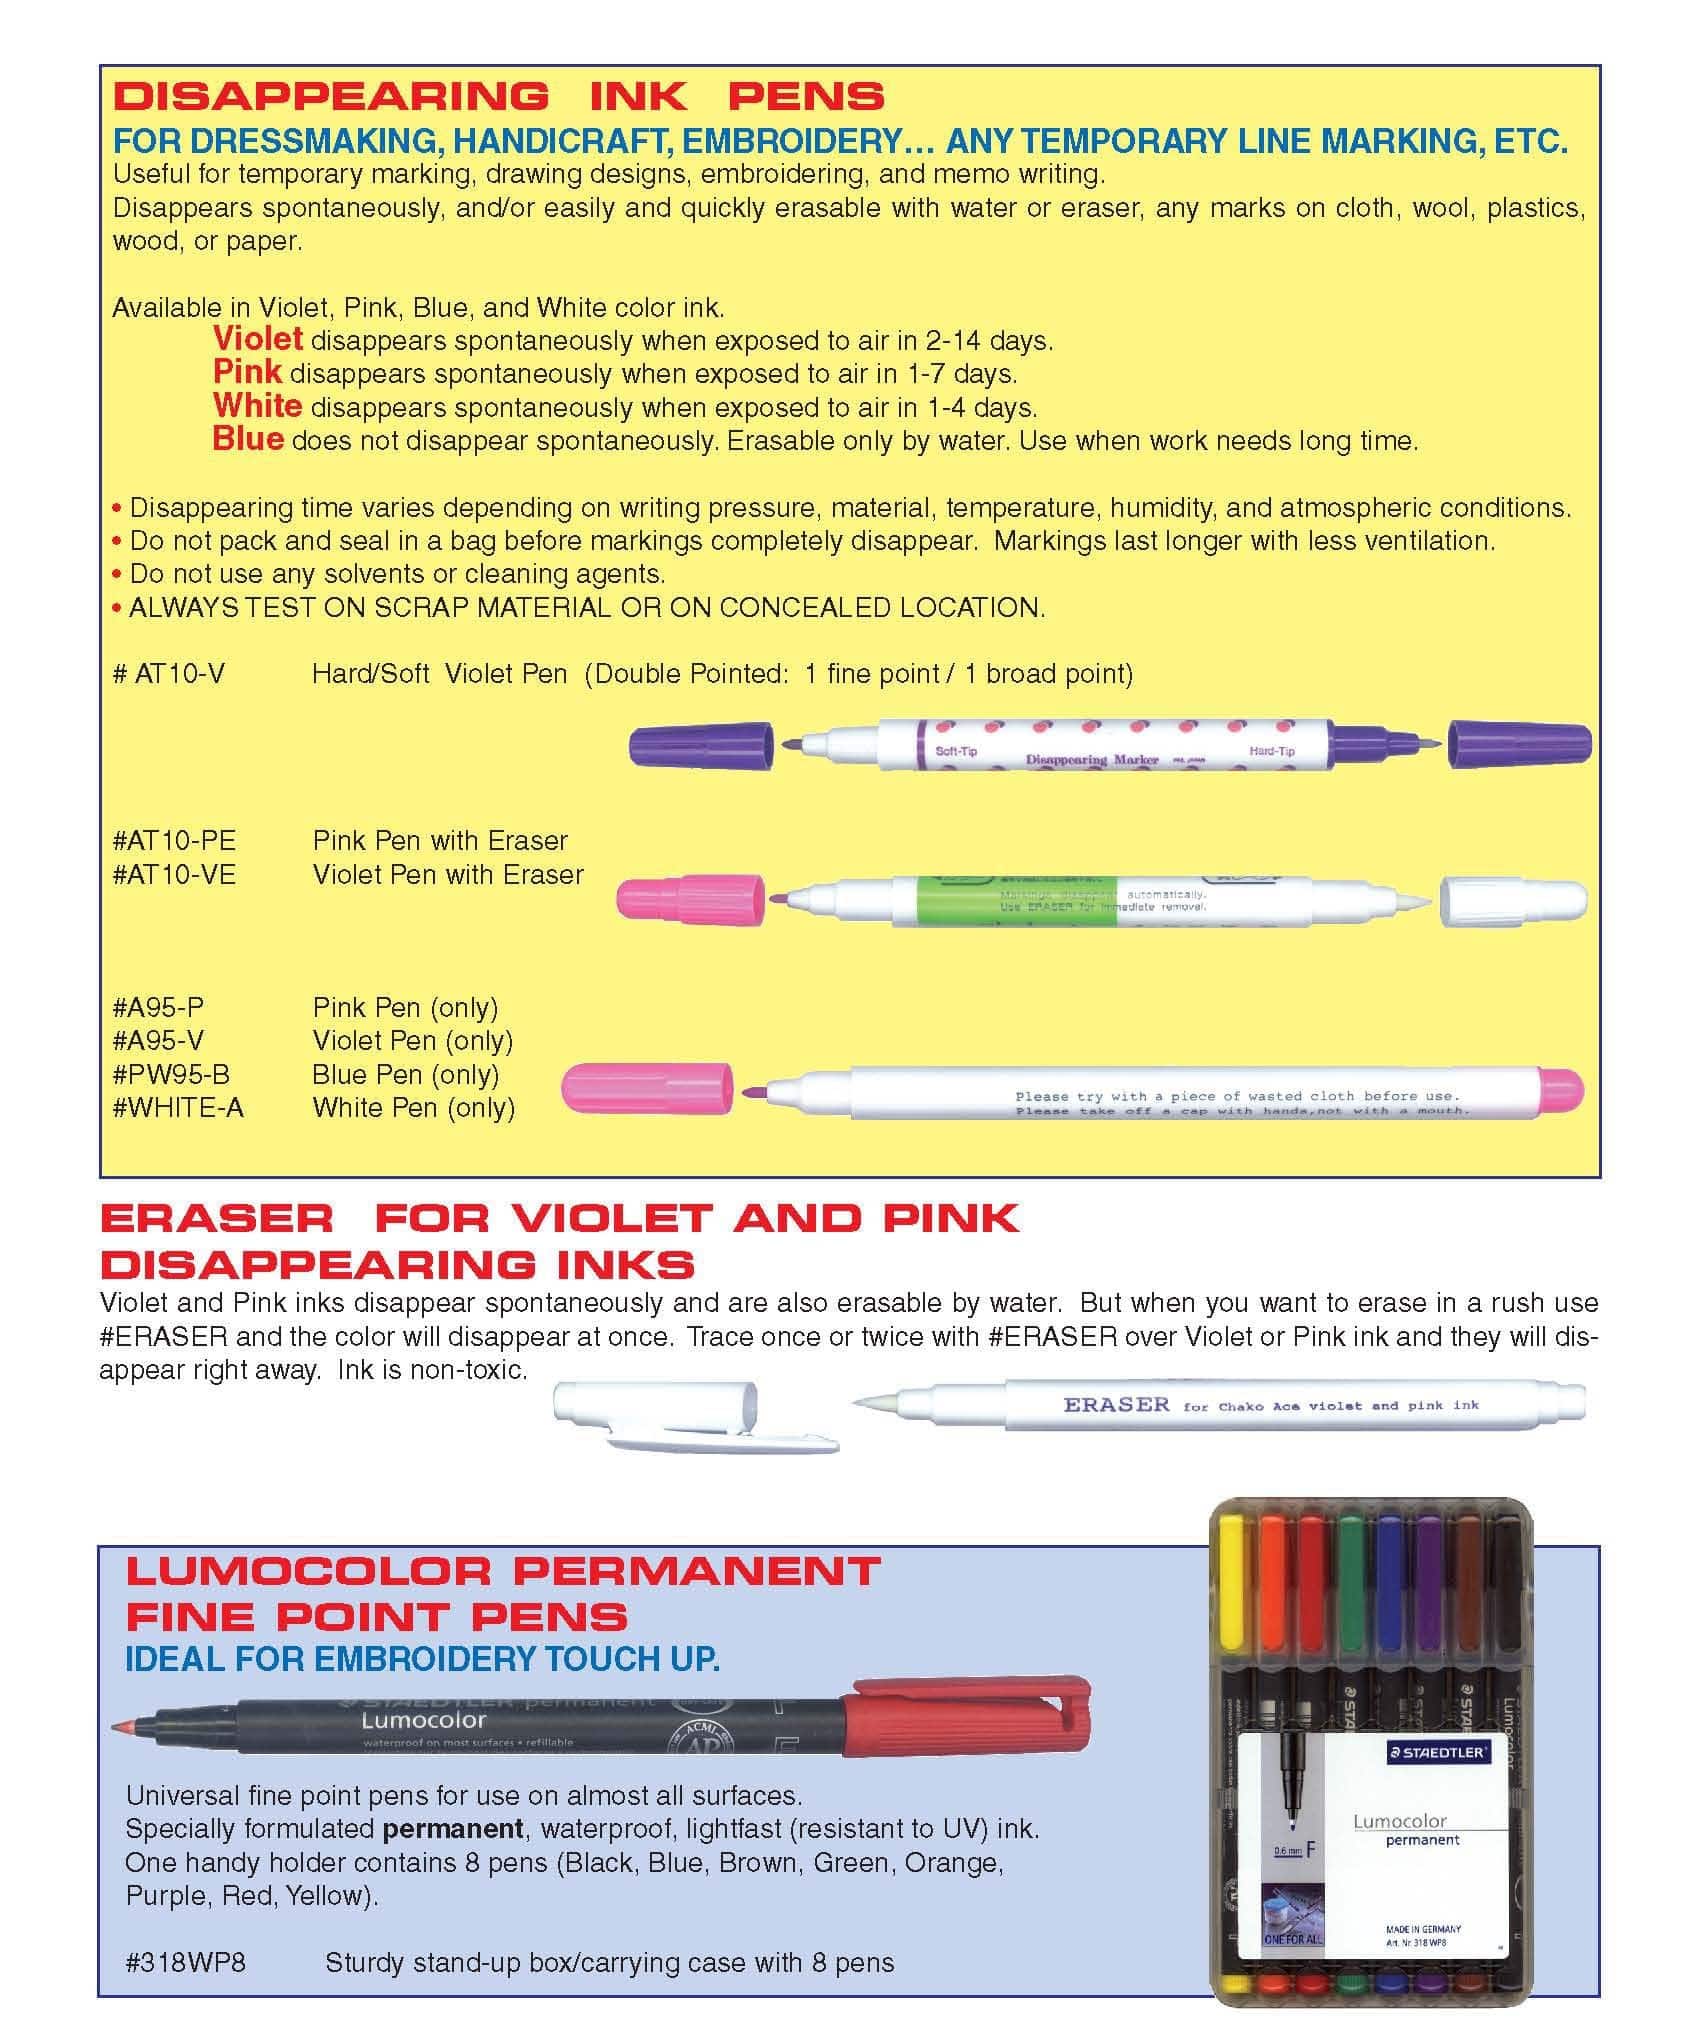 DISAPPEARING INK PENS
COLORS: 
A95-P = PINK
WHITE-A = WHITE
PW95-B = BLUE 
A95-V = VIOLET

AT10-V = DOUBLE POINTED - VIOLET
AT-10-PE = PINK PEN WITH ERASER